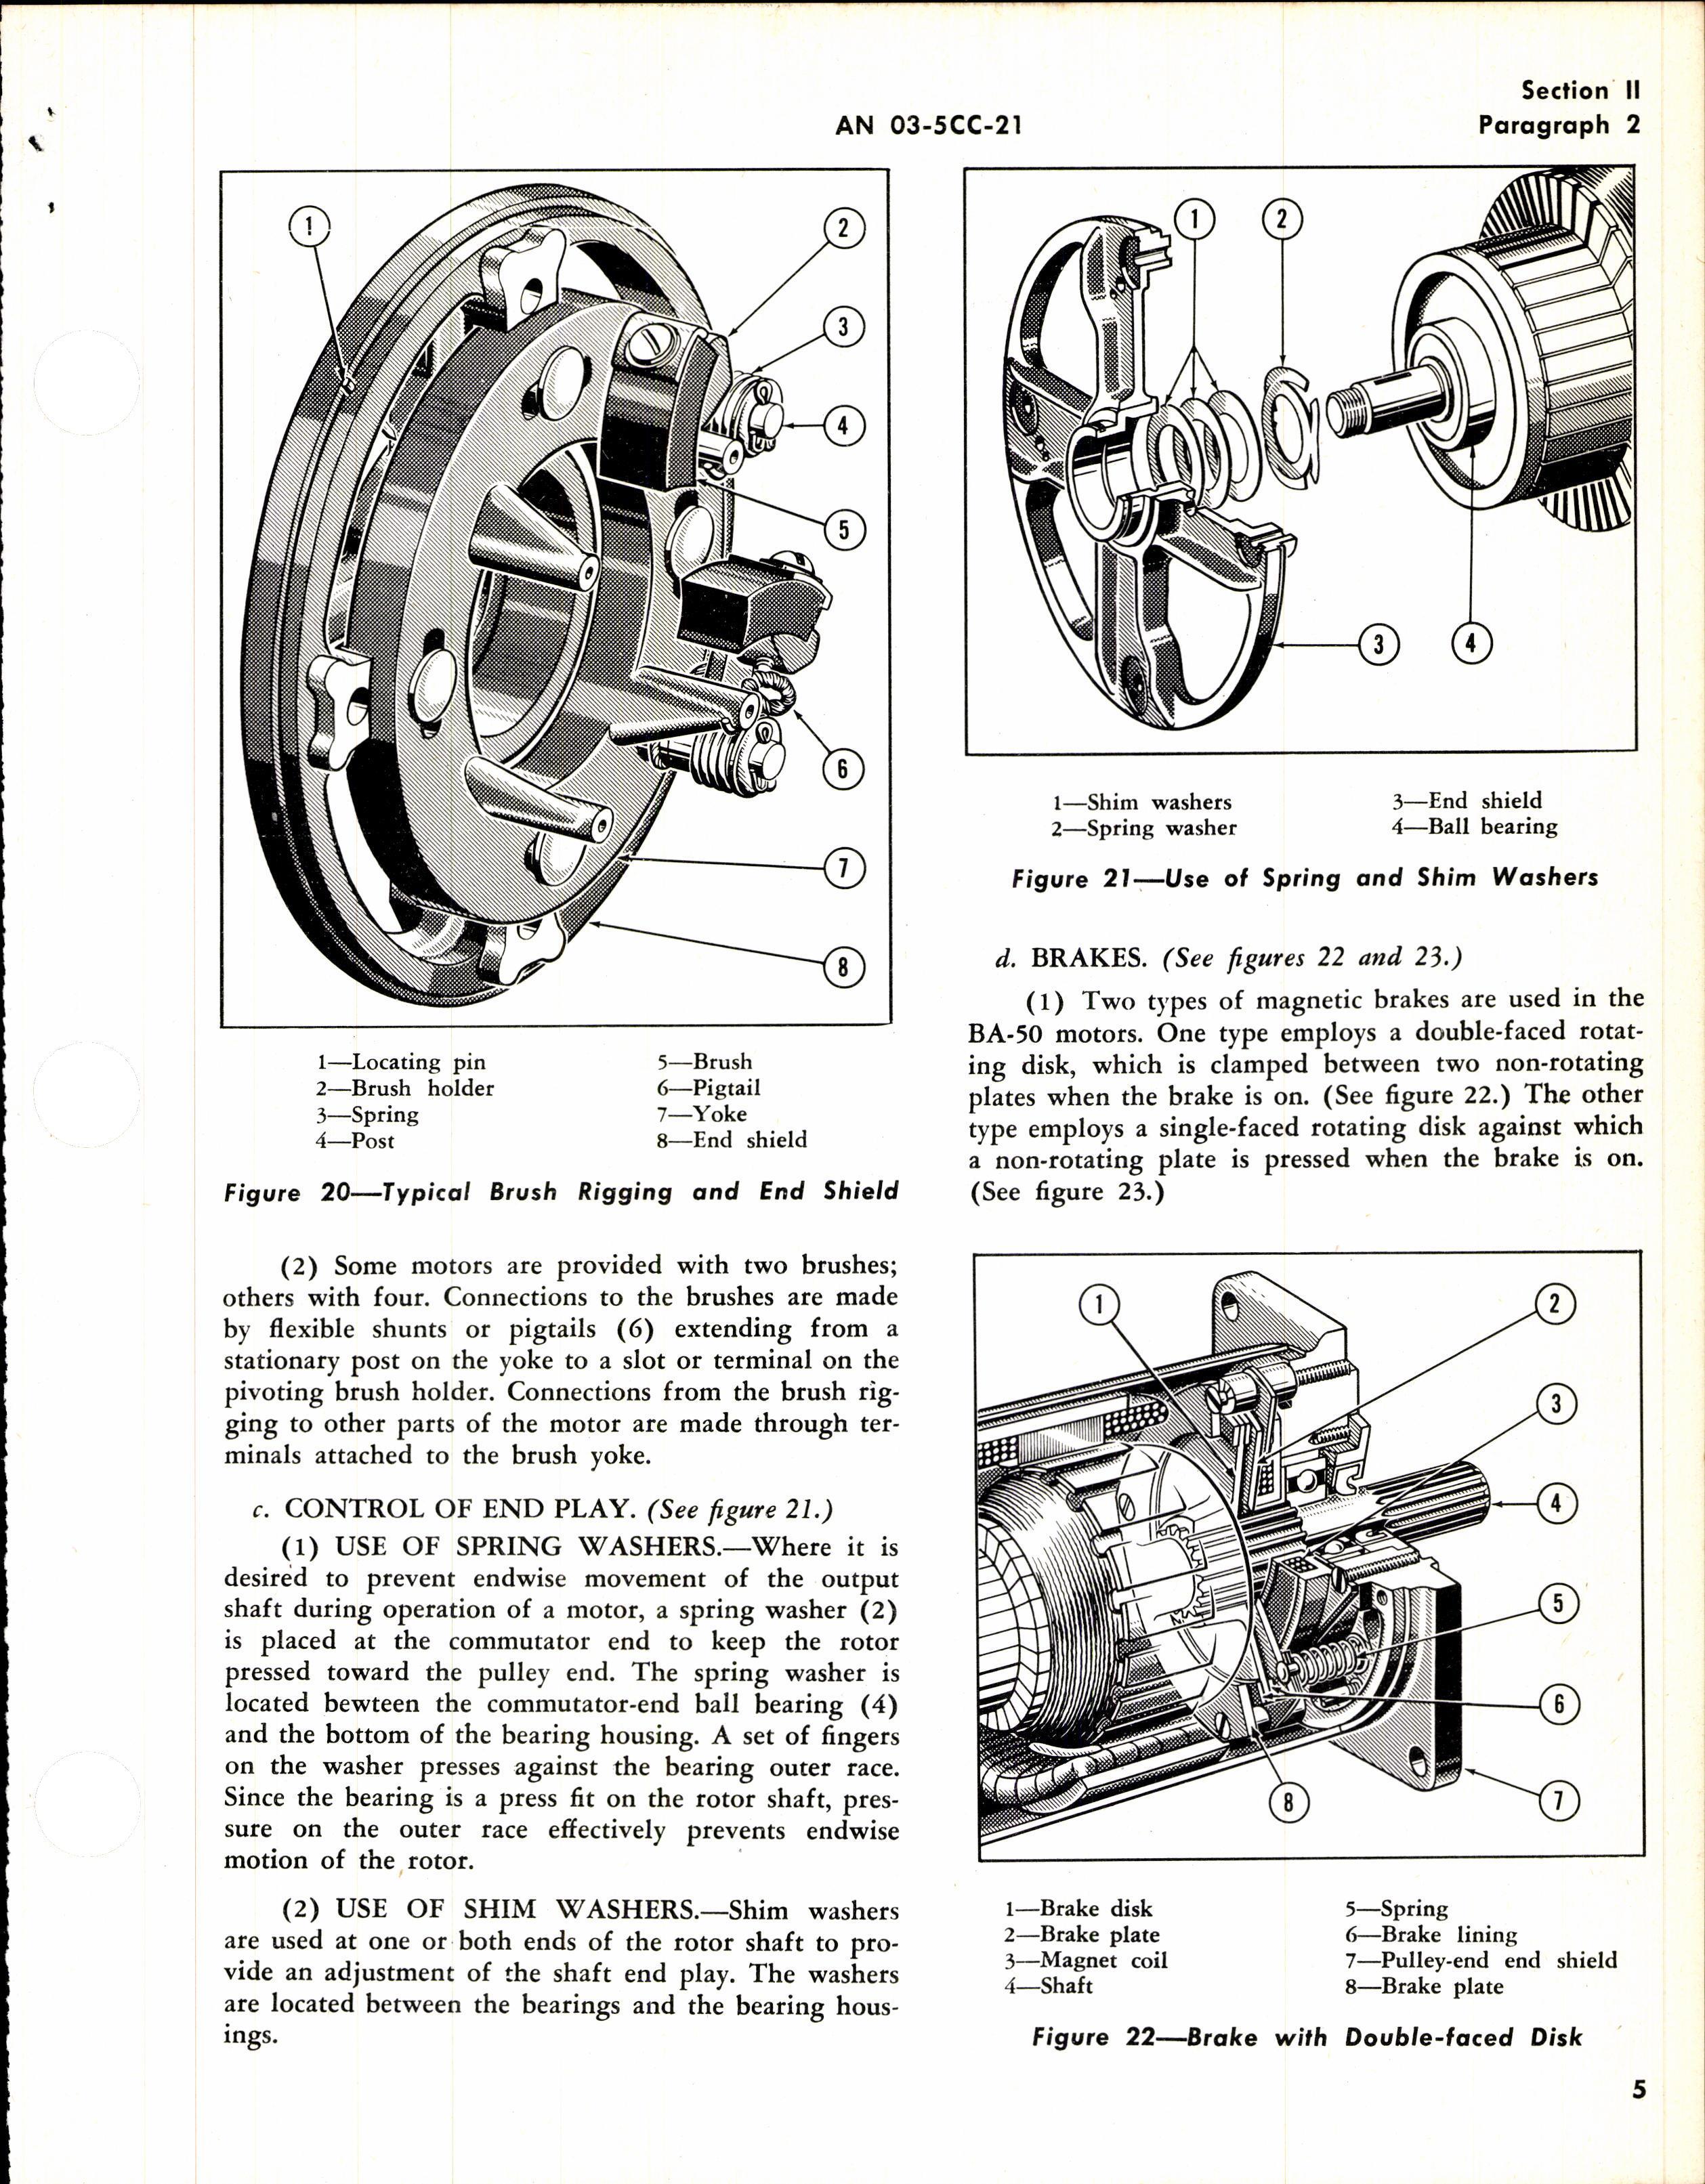 Sample page 7 from AirCorps Library document: HB of Instructions with Parts Catalog for Model 5BA50 Electric Motor